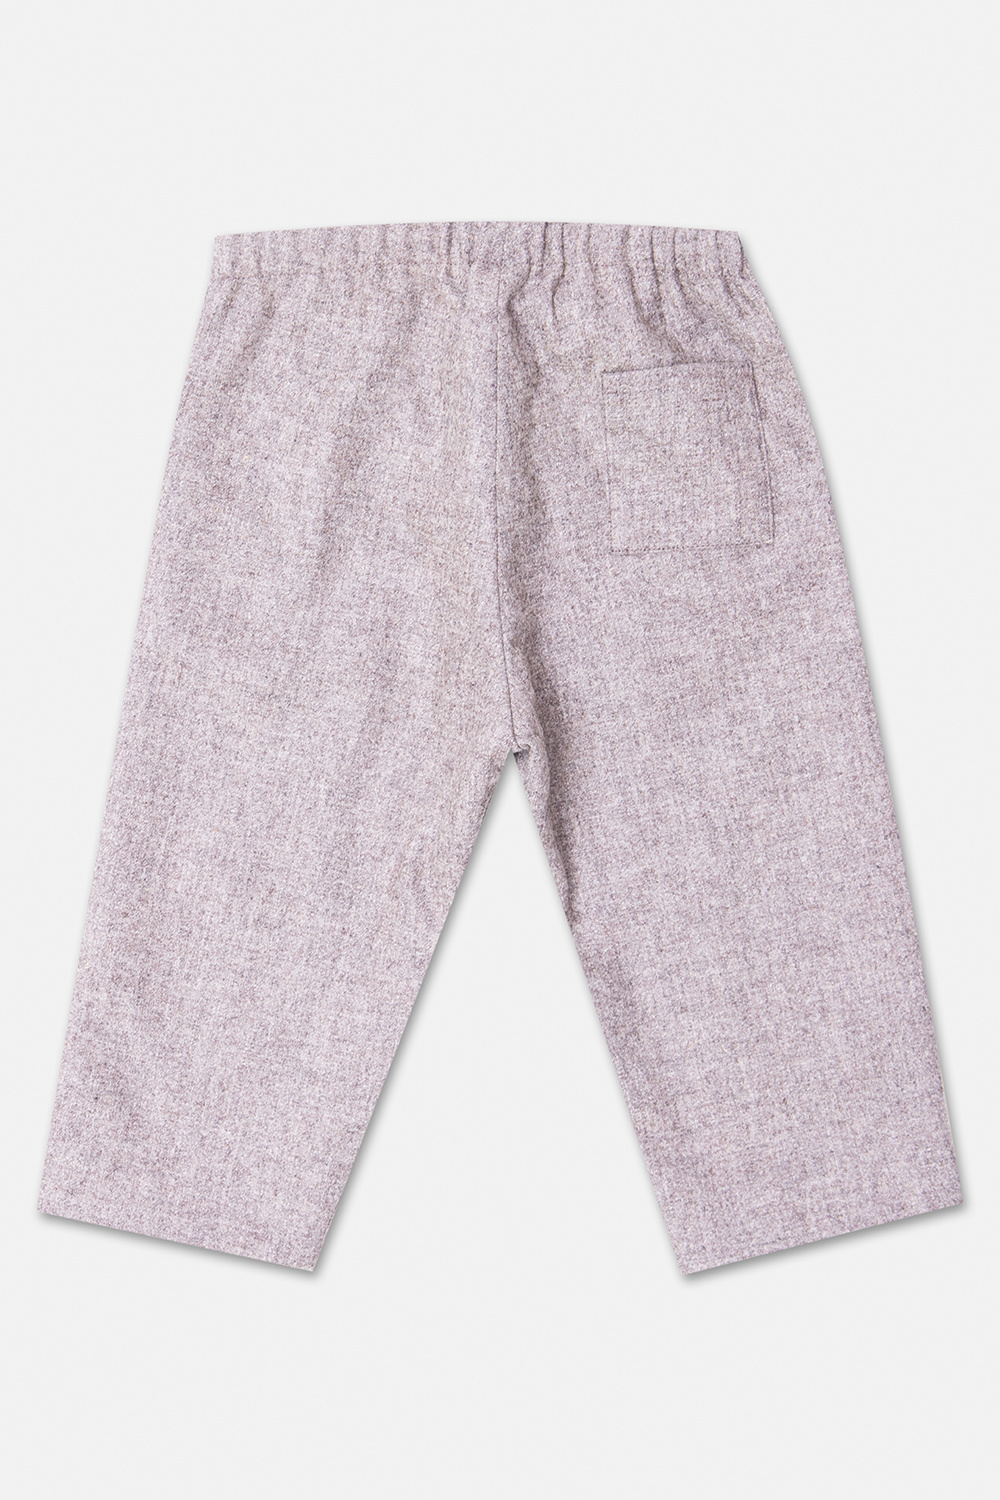 Bonpoint  Wool trousers